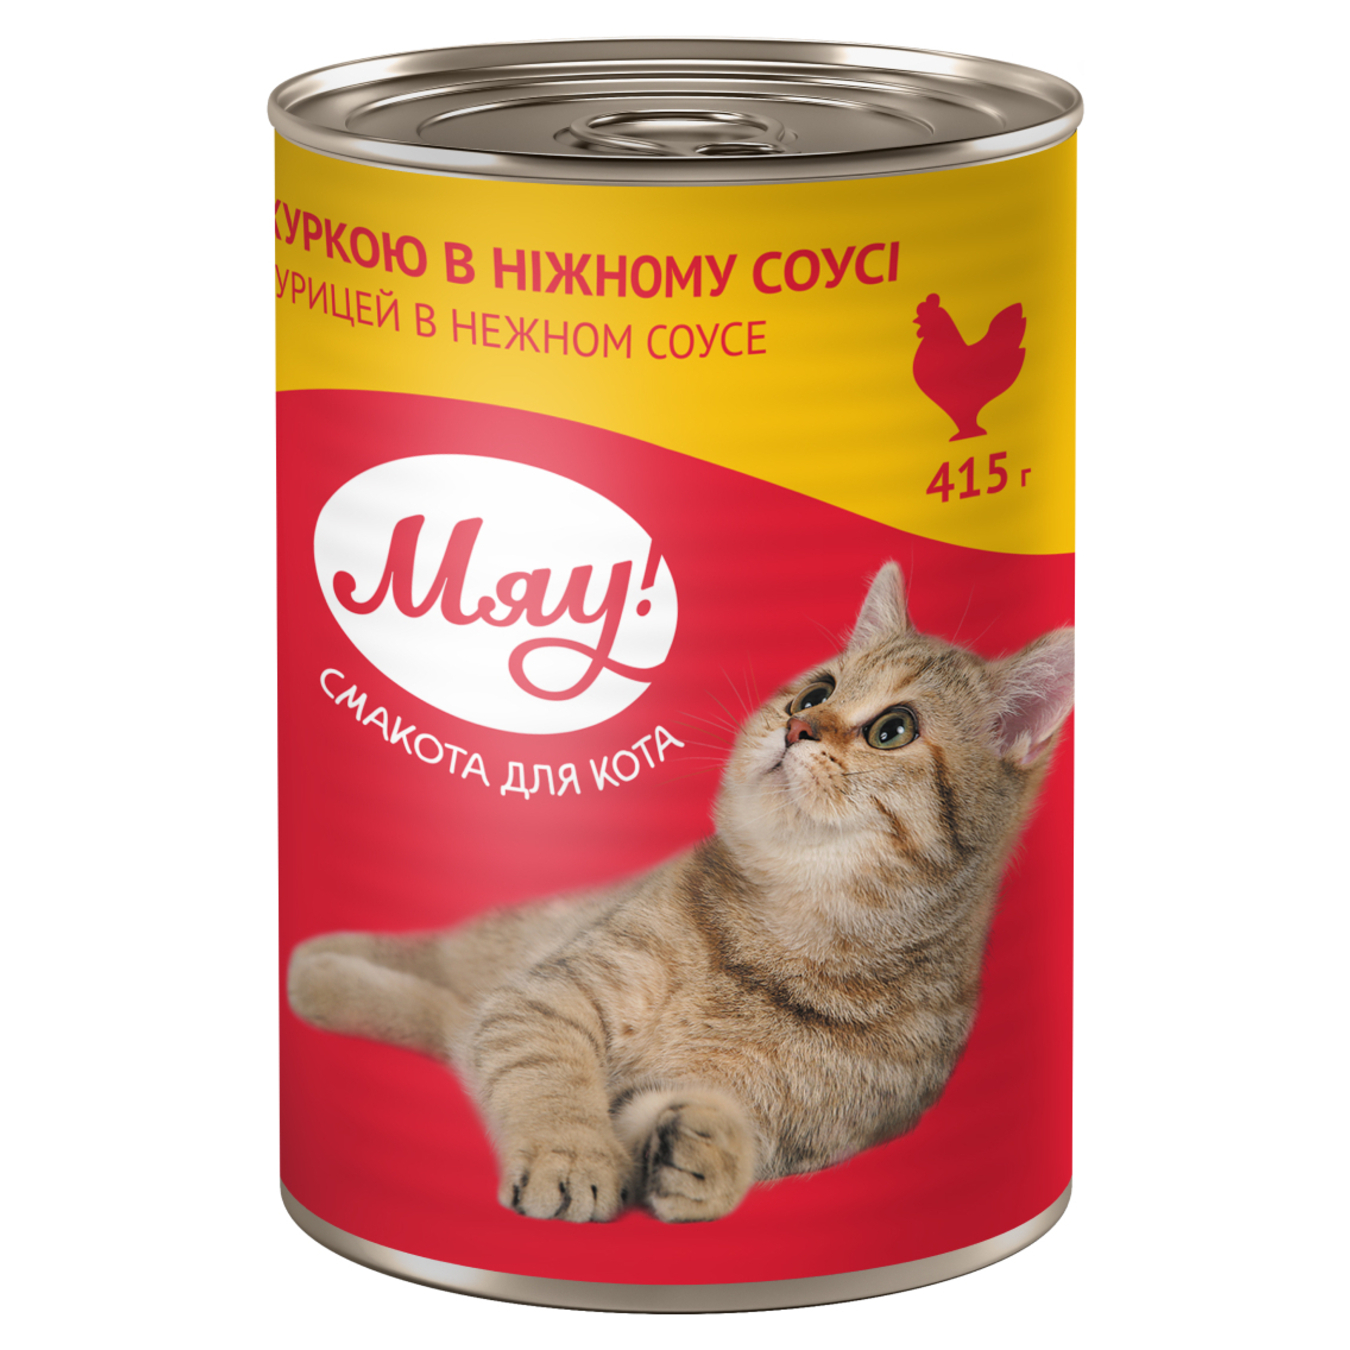 Meow! Chicken in a delicate sauce Cat food 415g